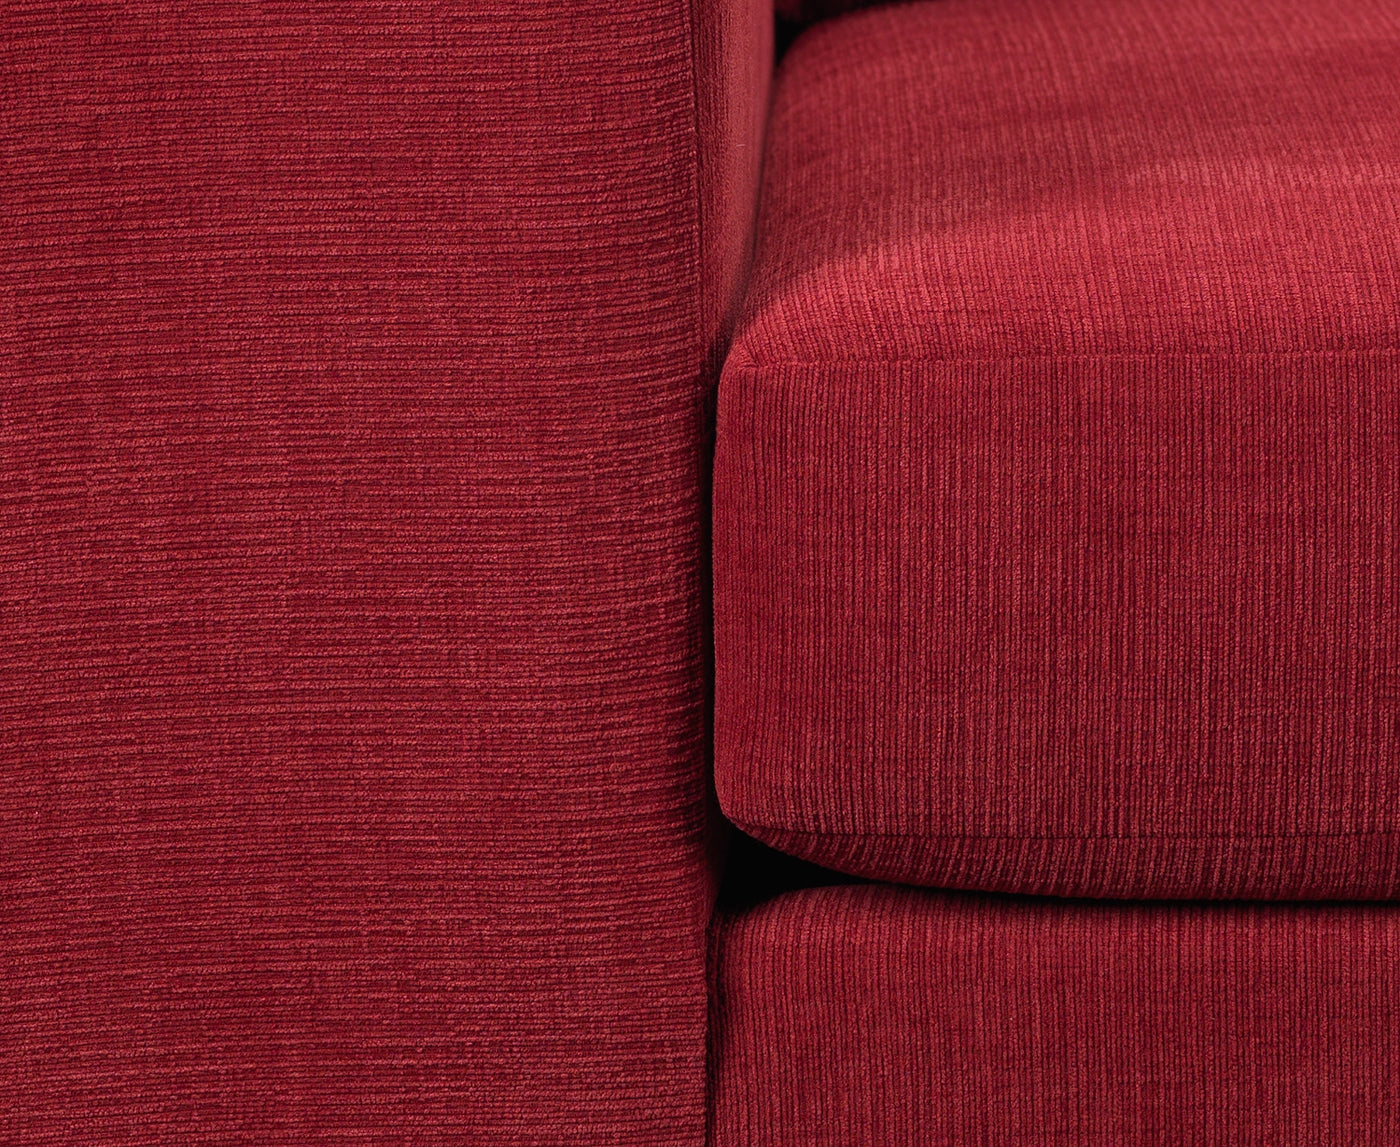 Fava Sofa and Loveseat Set - Red